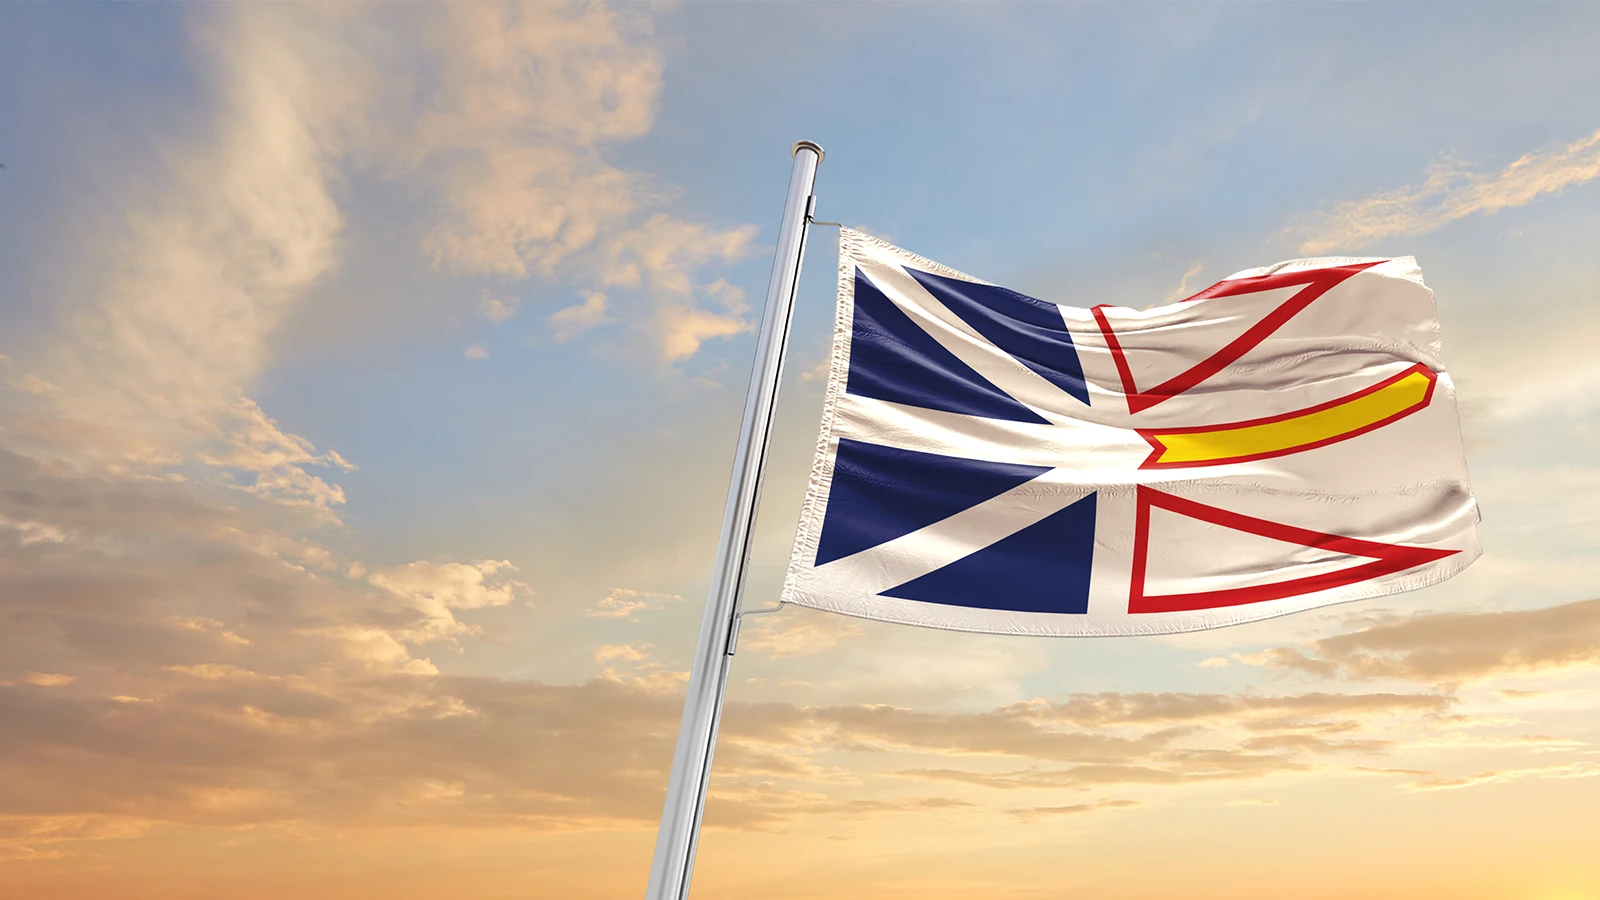 Newfoundland and Labrador flag blowing in wind with sunset backdrop